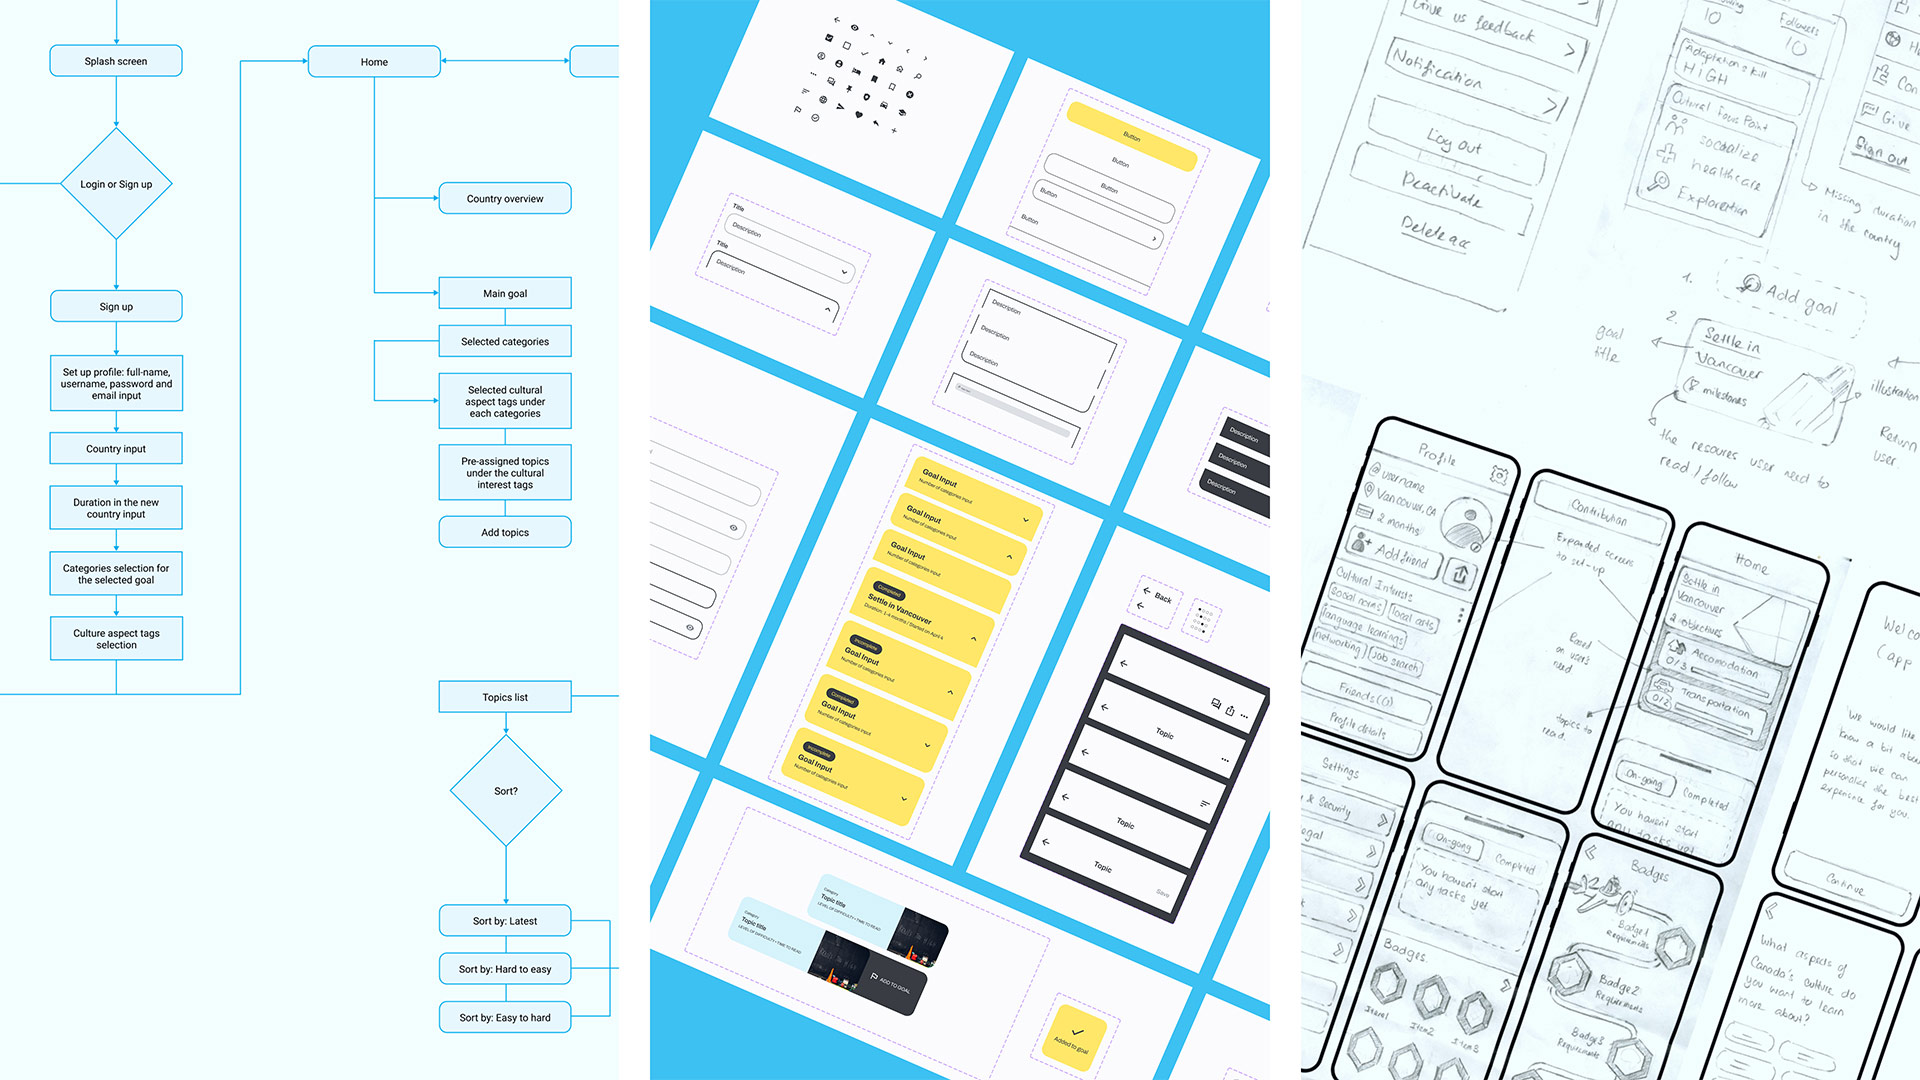 Collage grid of illustration sketches, sitemap, and UI components for the Roam app.